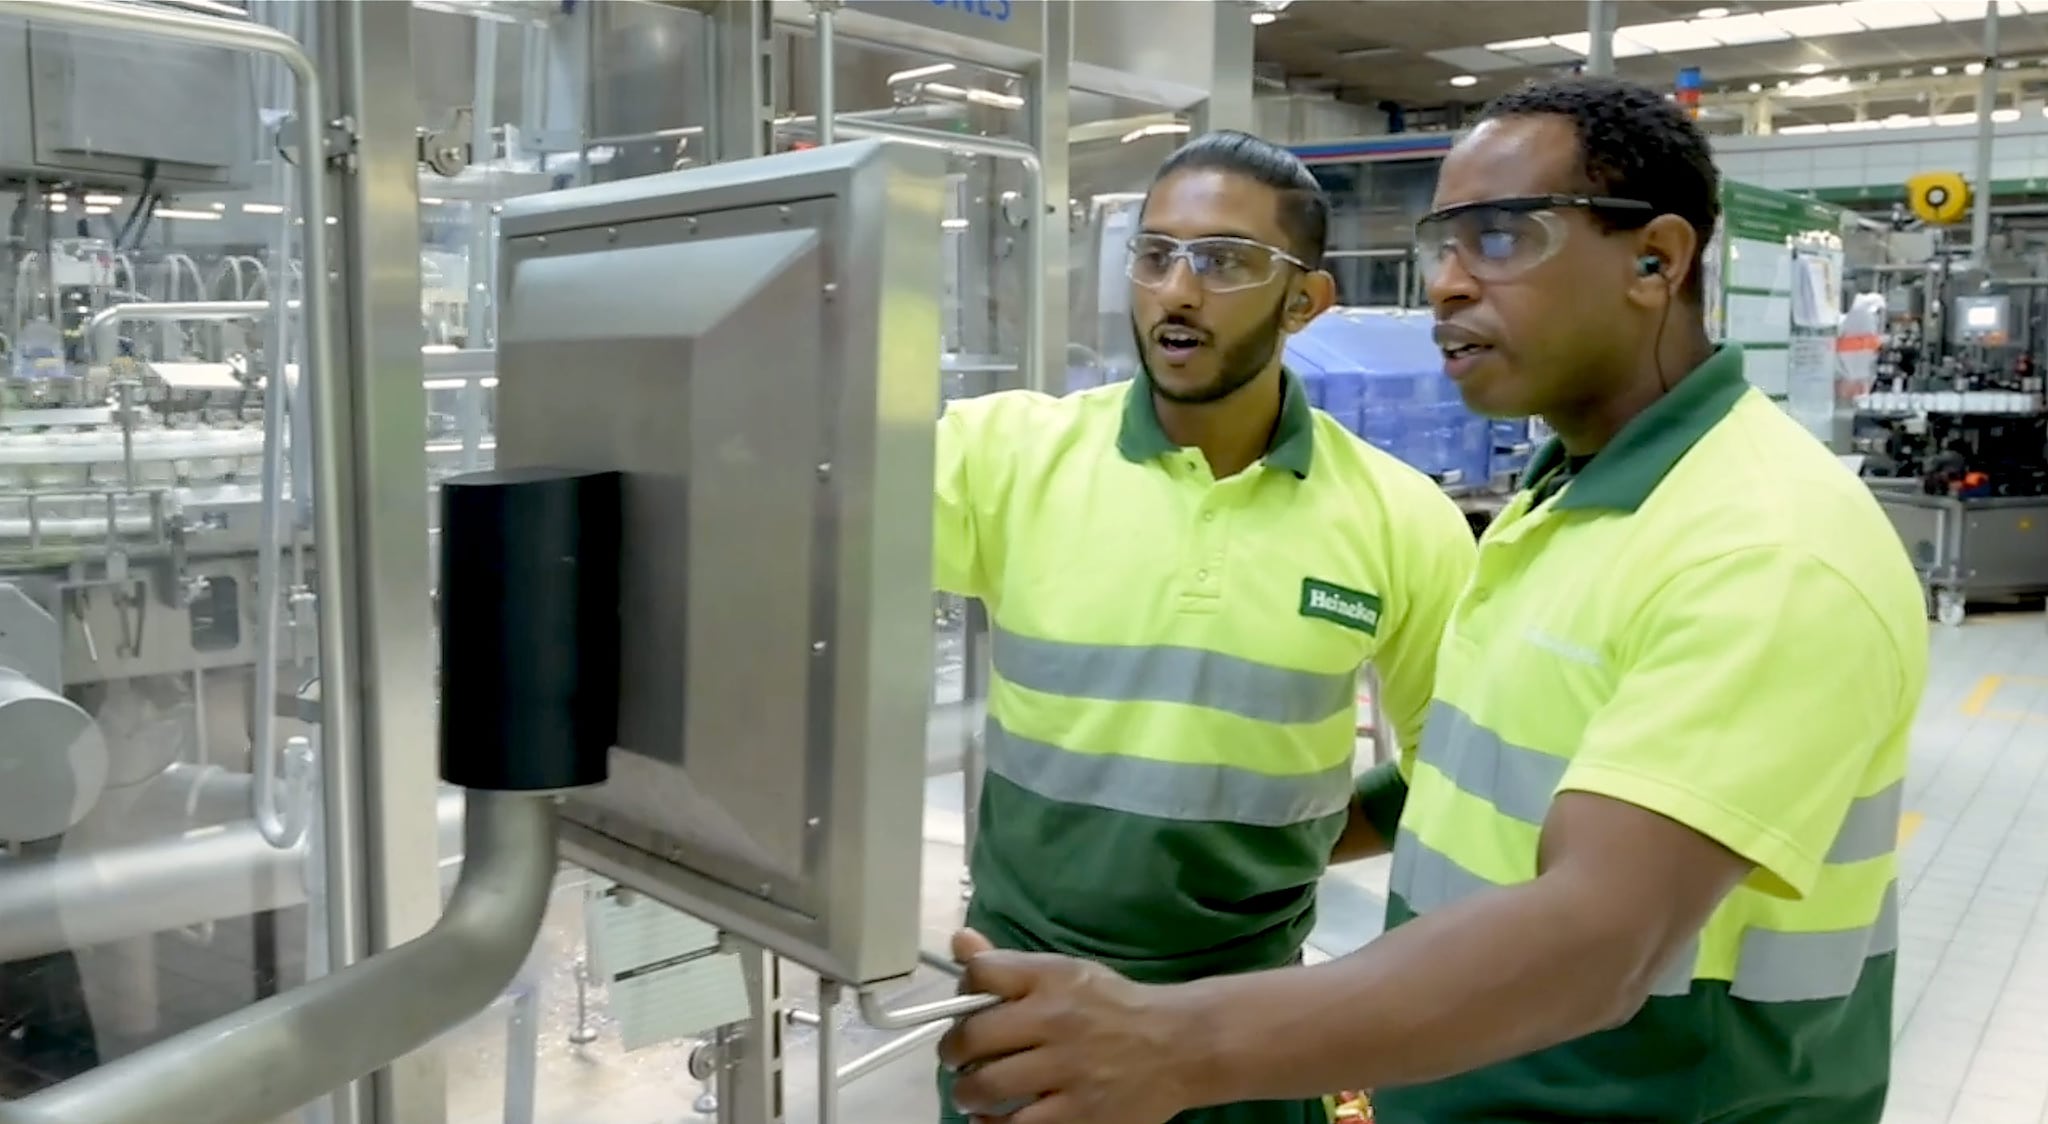 Heineken employees consult technology that monitors the brewing process